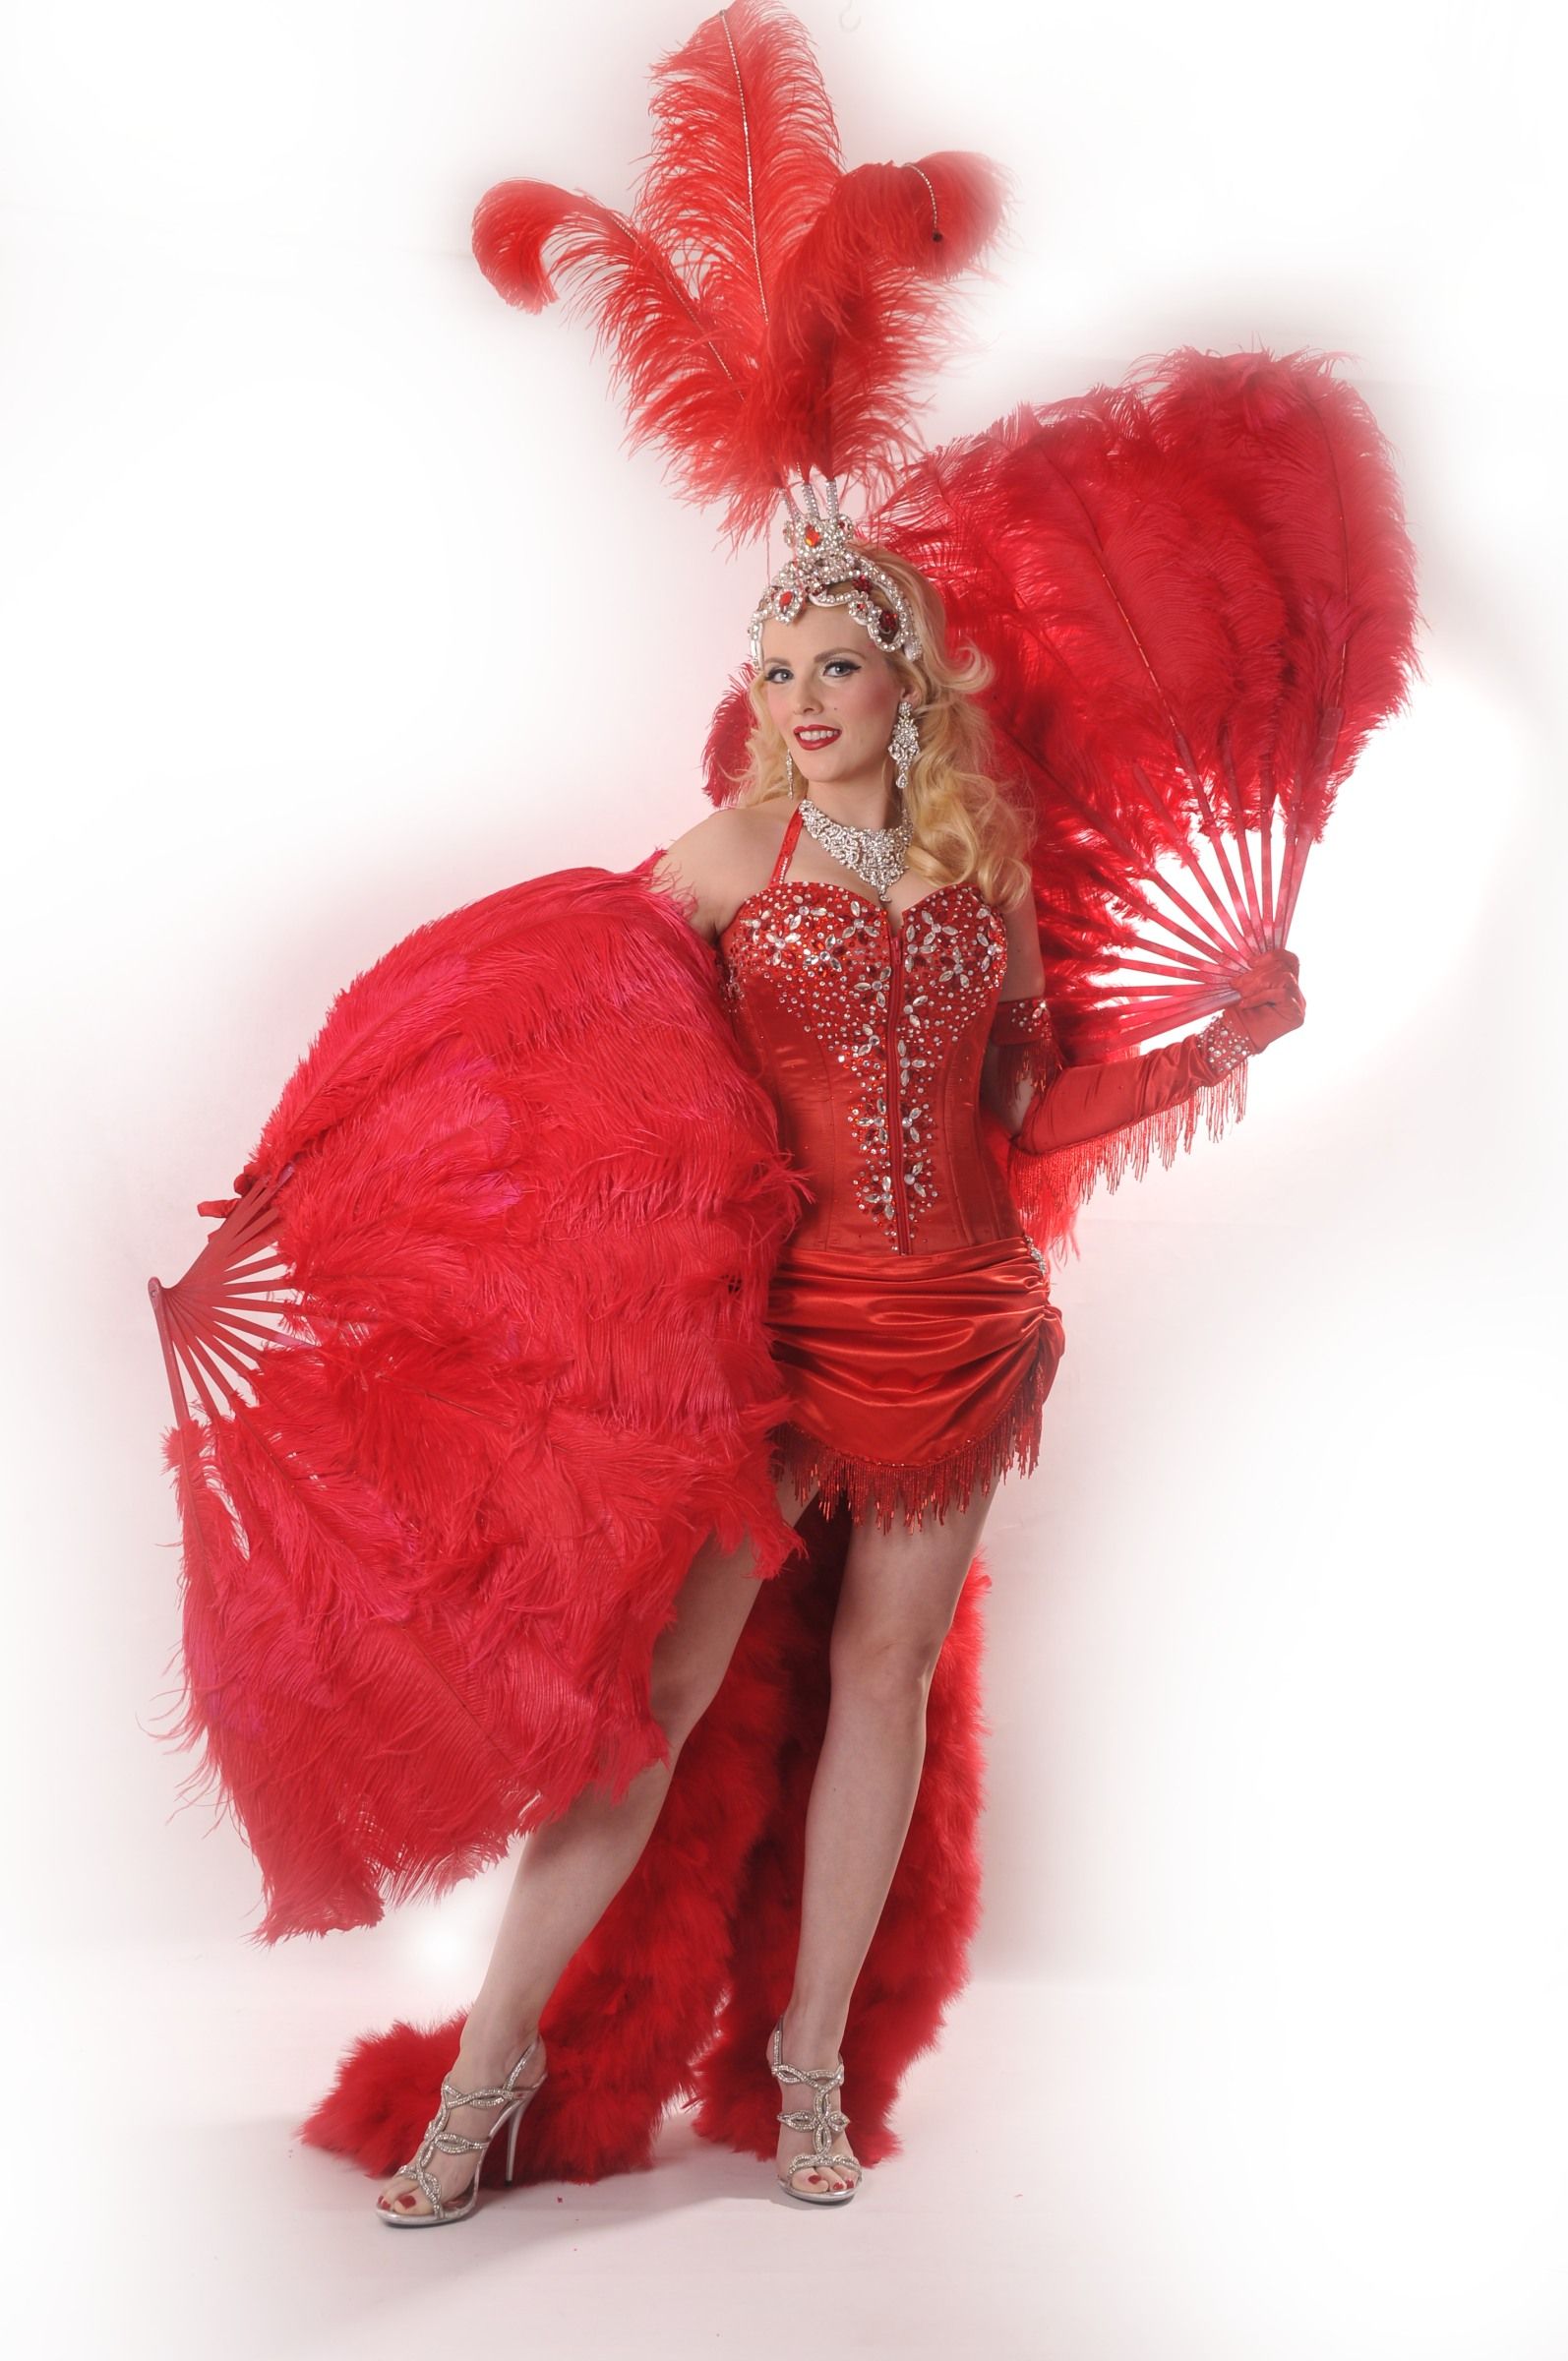 Moulin Rouge act red outfit holding large red feathered fans 